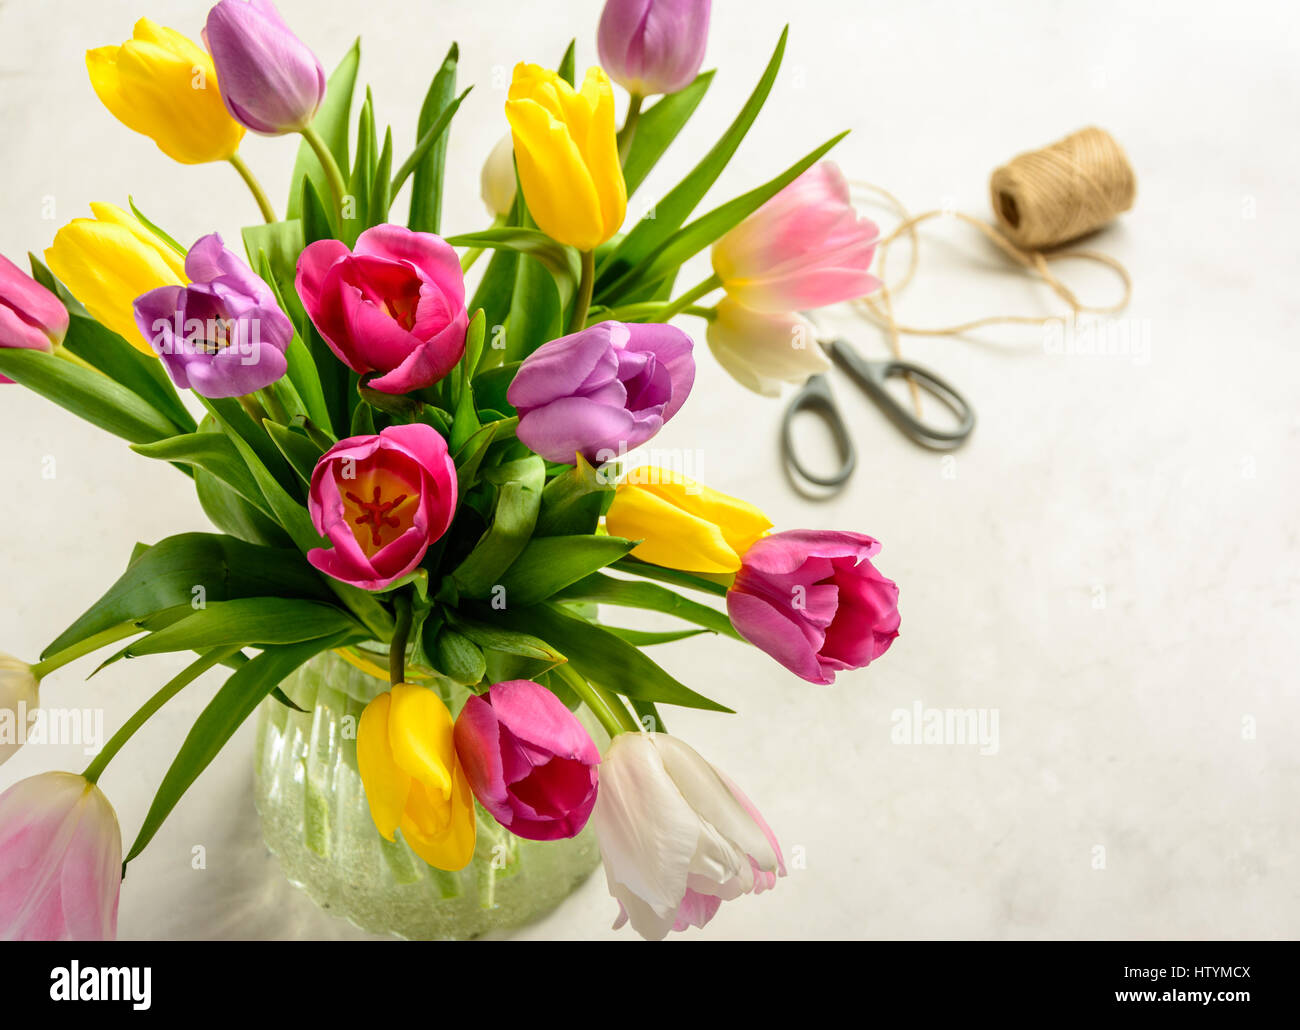 Beautiful festive bouquet of tulips on white background. Copy space. Stock Photo